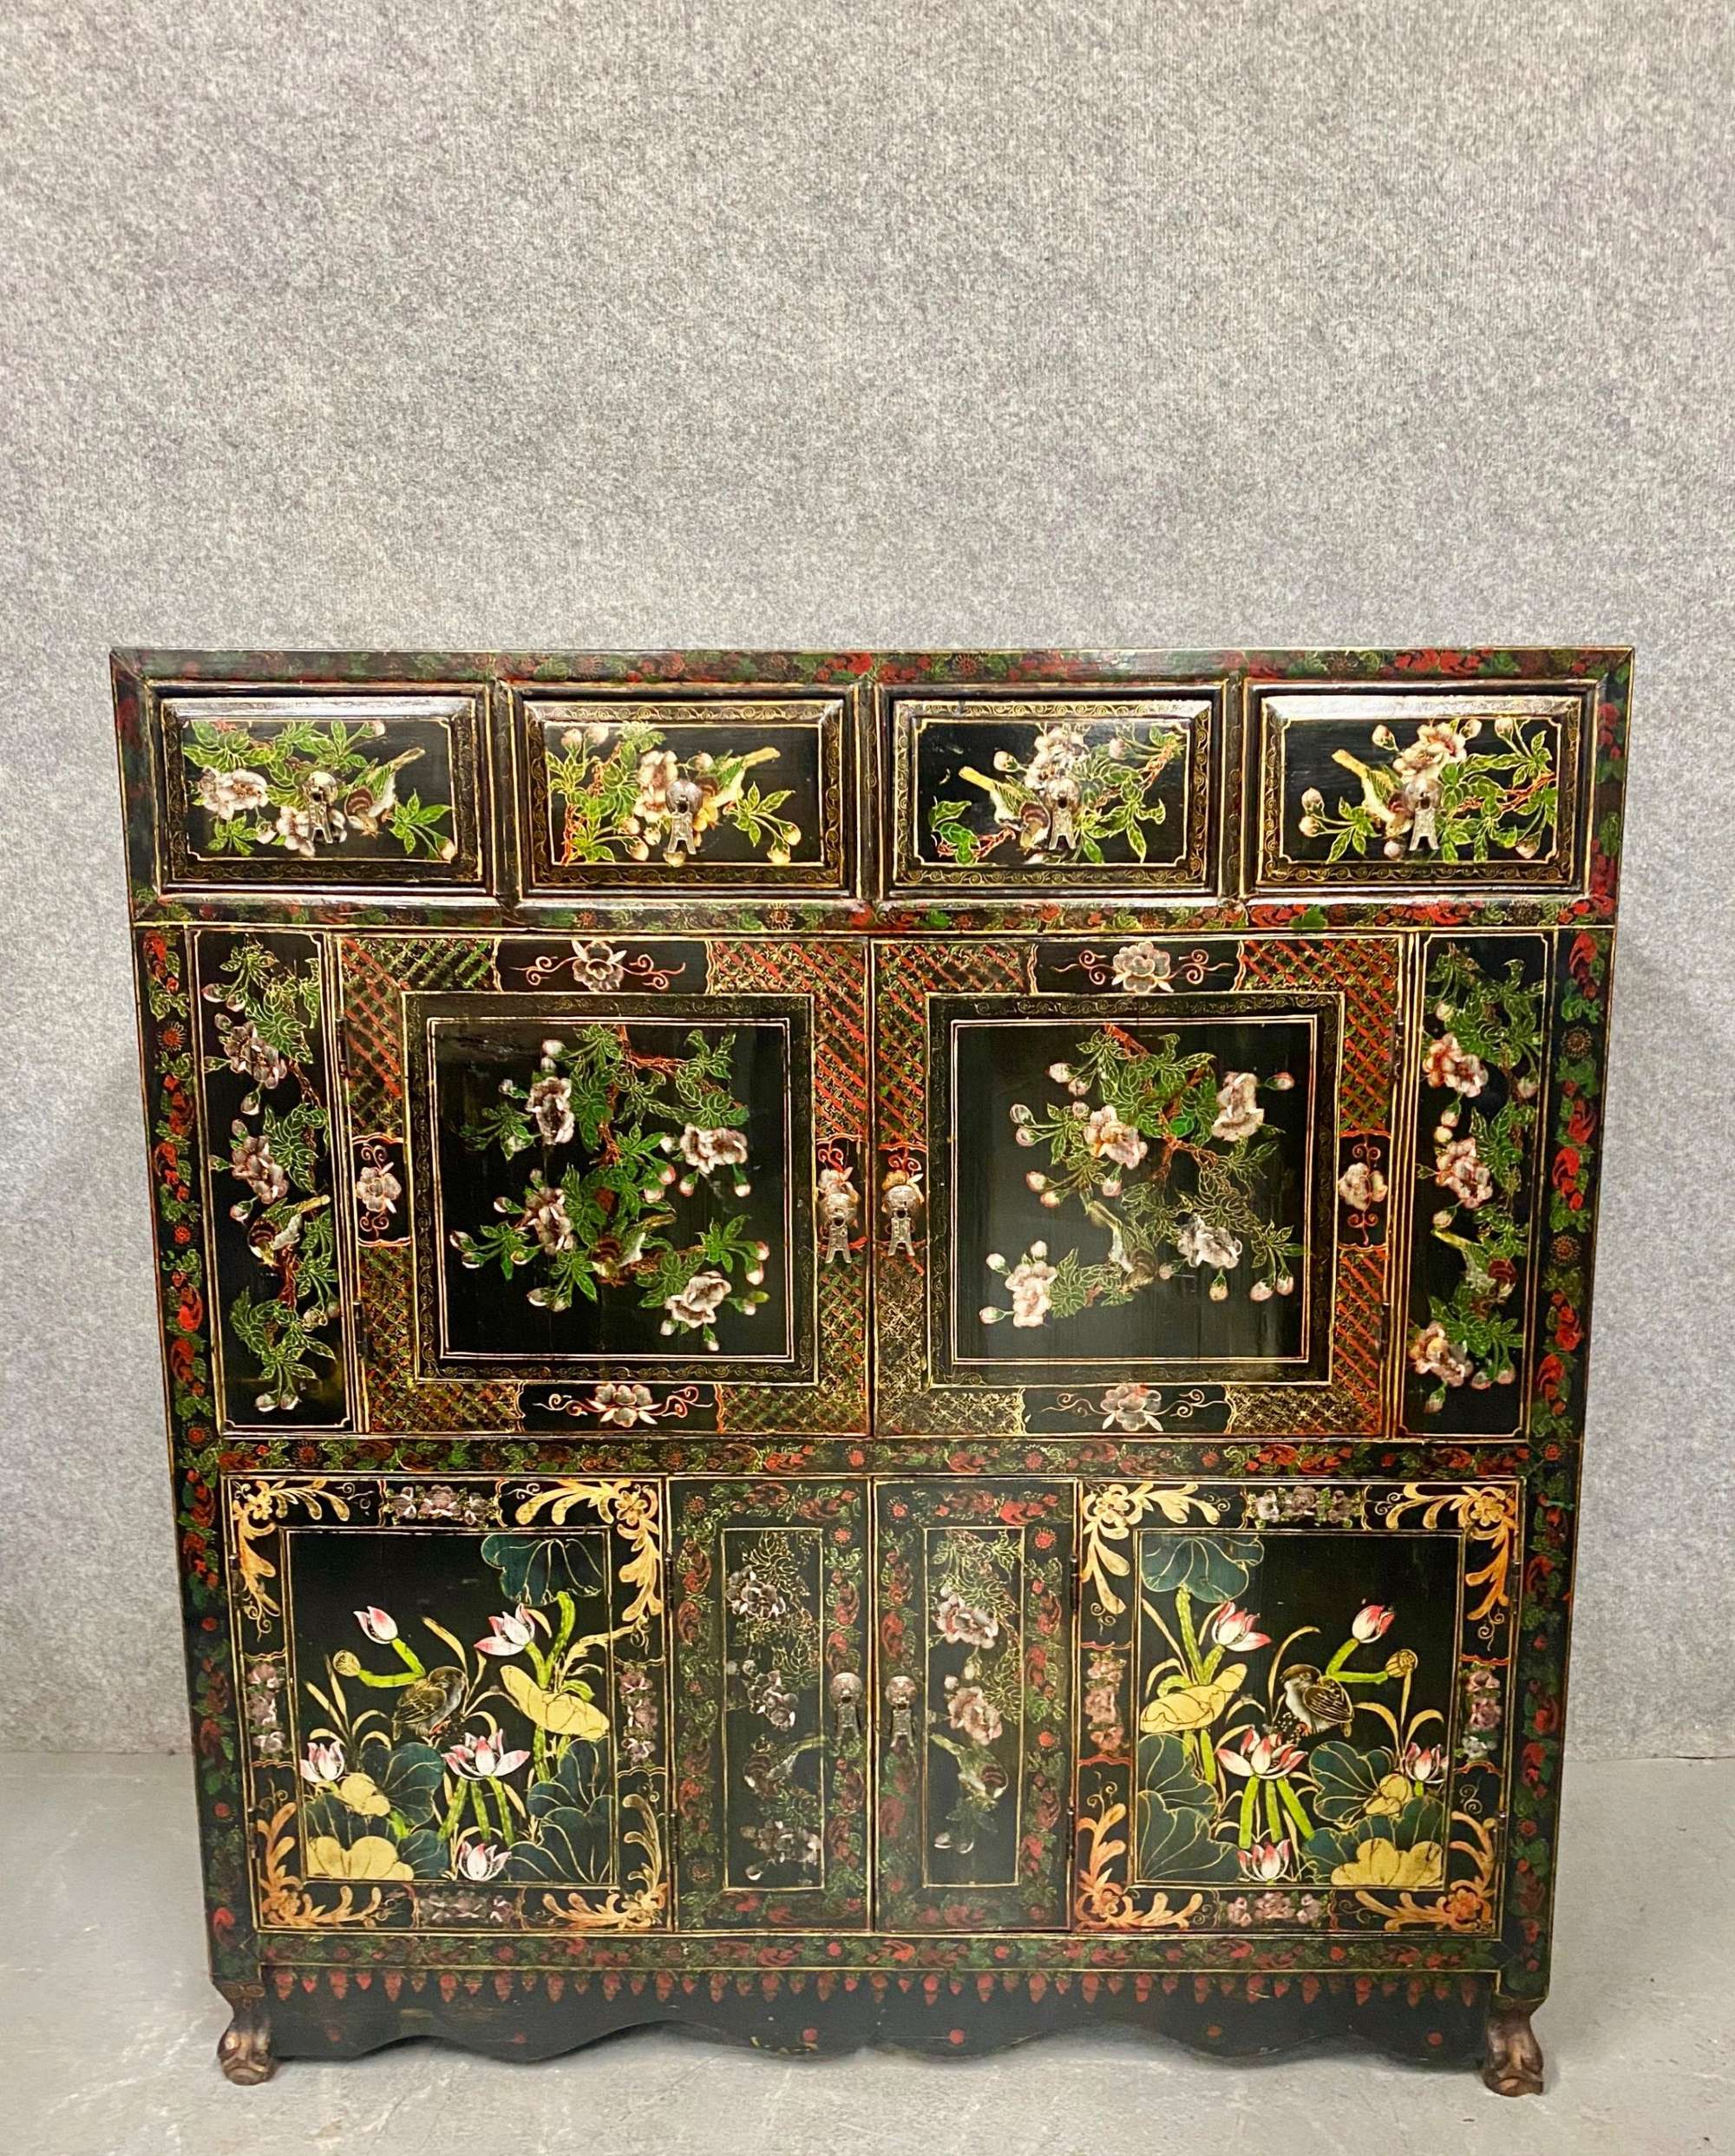 Late Chinese Qing Dynasty Freestanding Cabinet